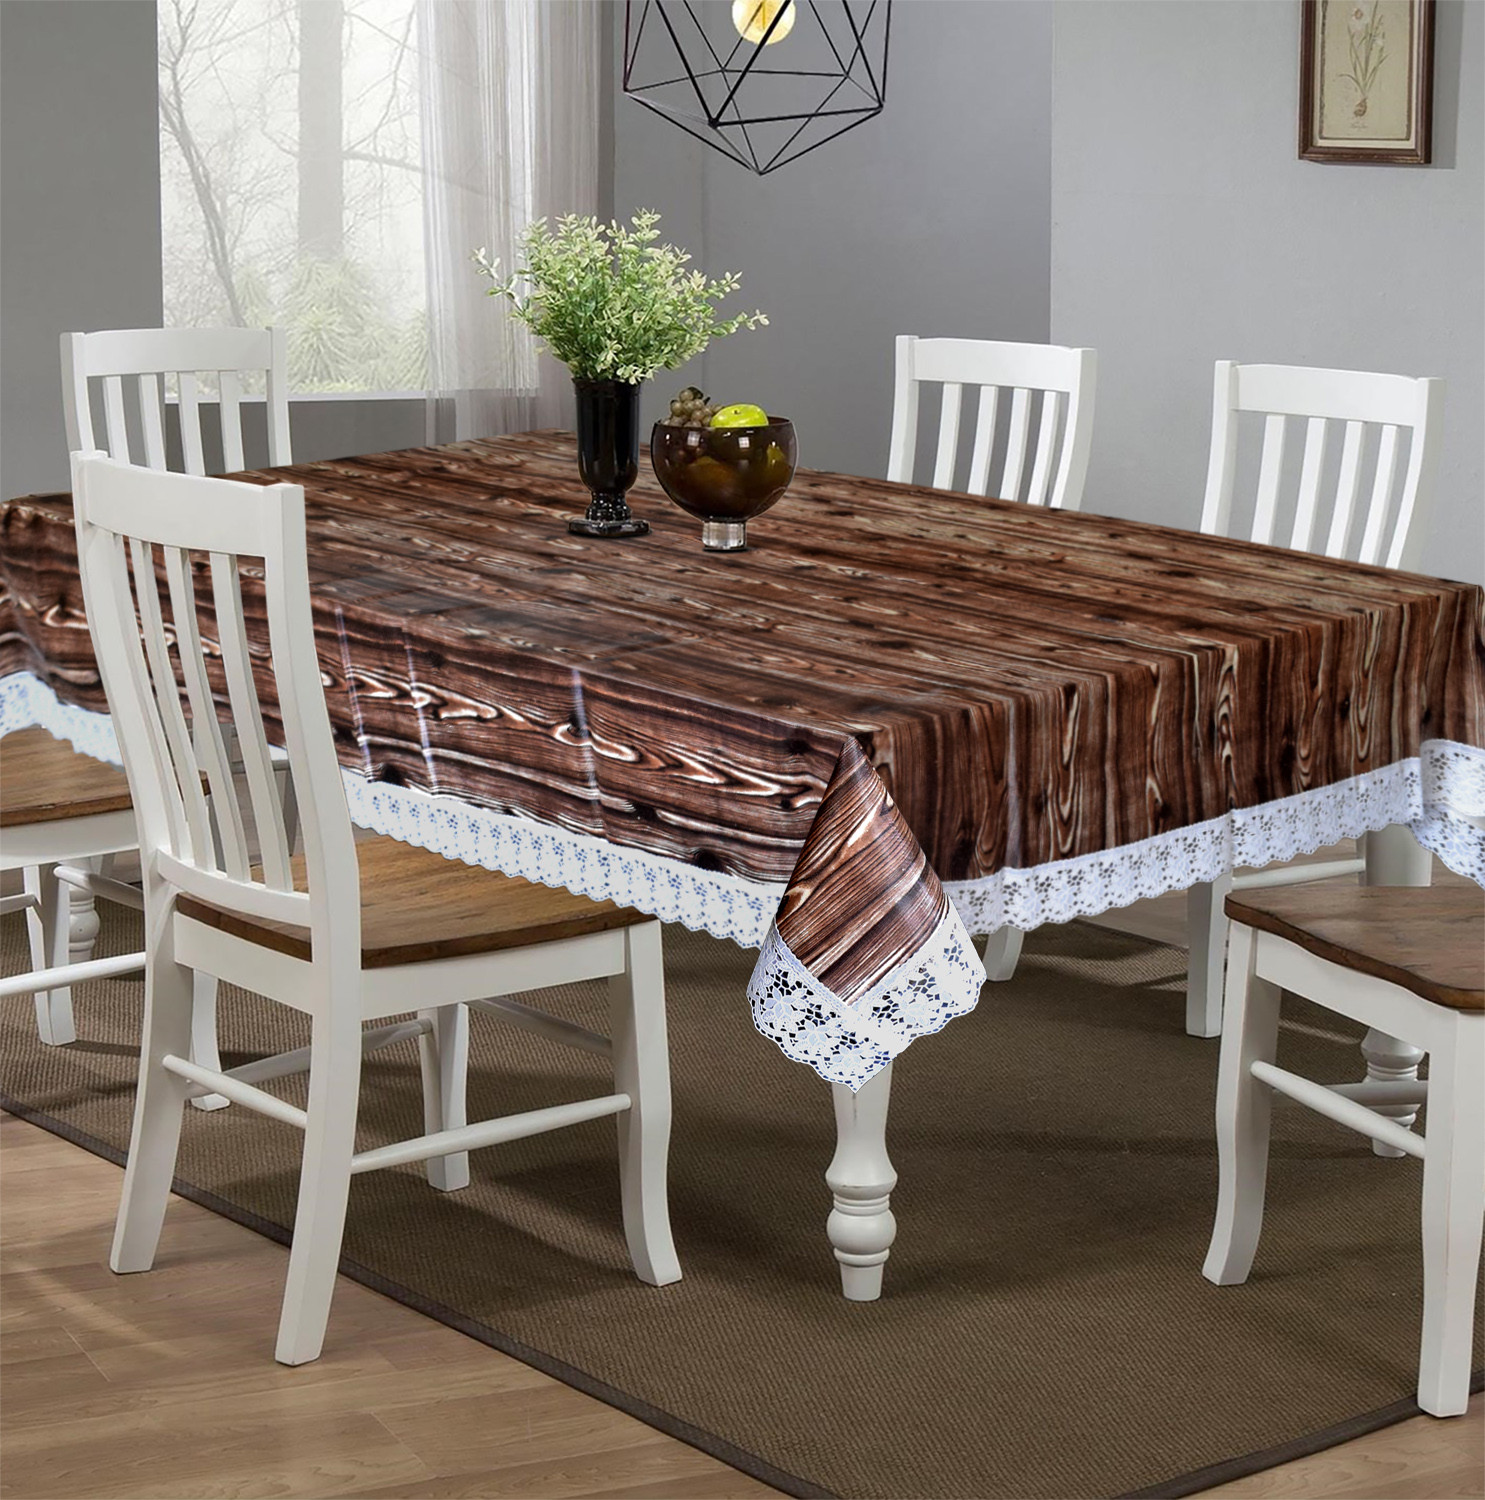 Kuber Industries Wooden Print PVC Dining Table Cover/Table Cloth For Home Decorative Luxurious 6 Seater, 60